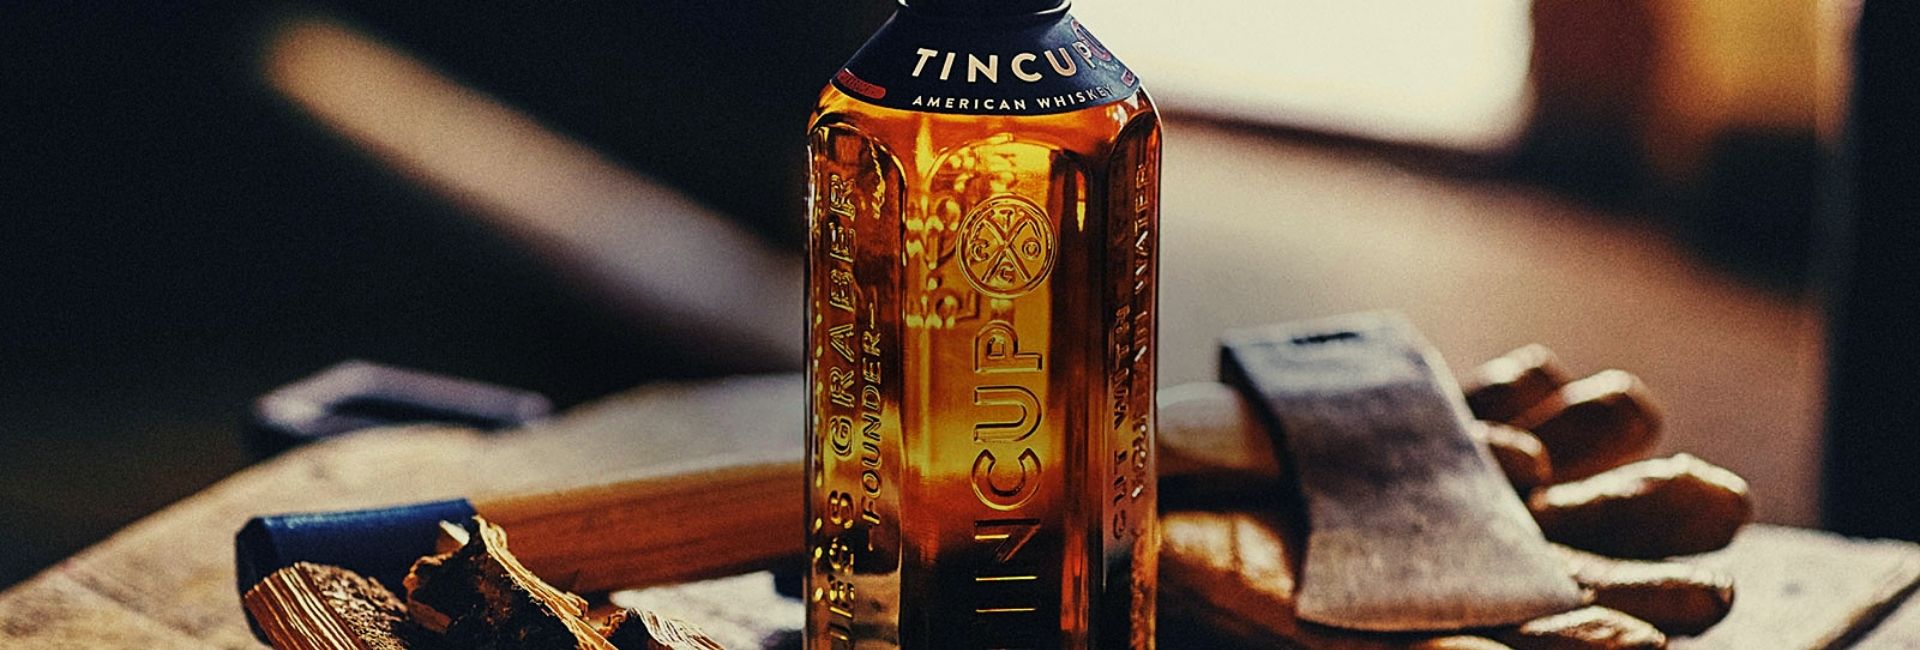 Tincup American Whiskey Review